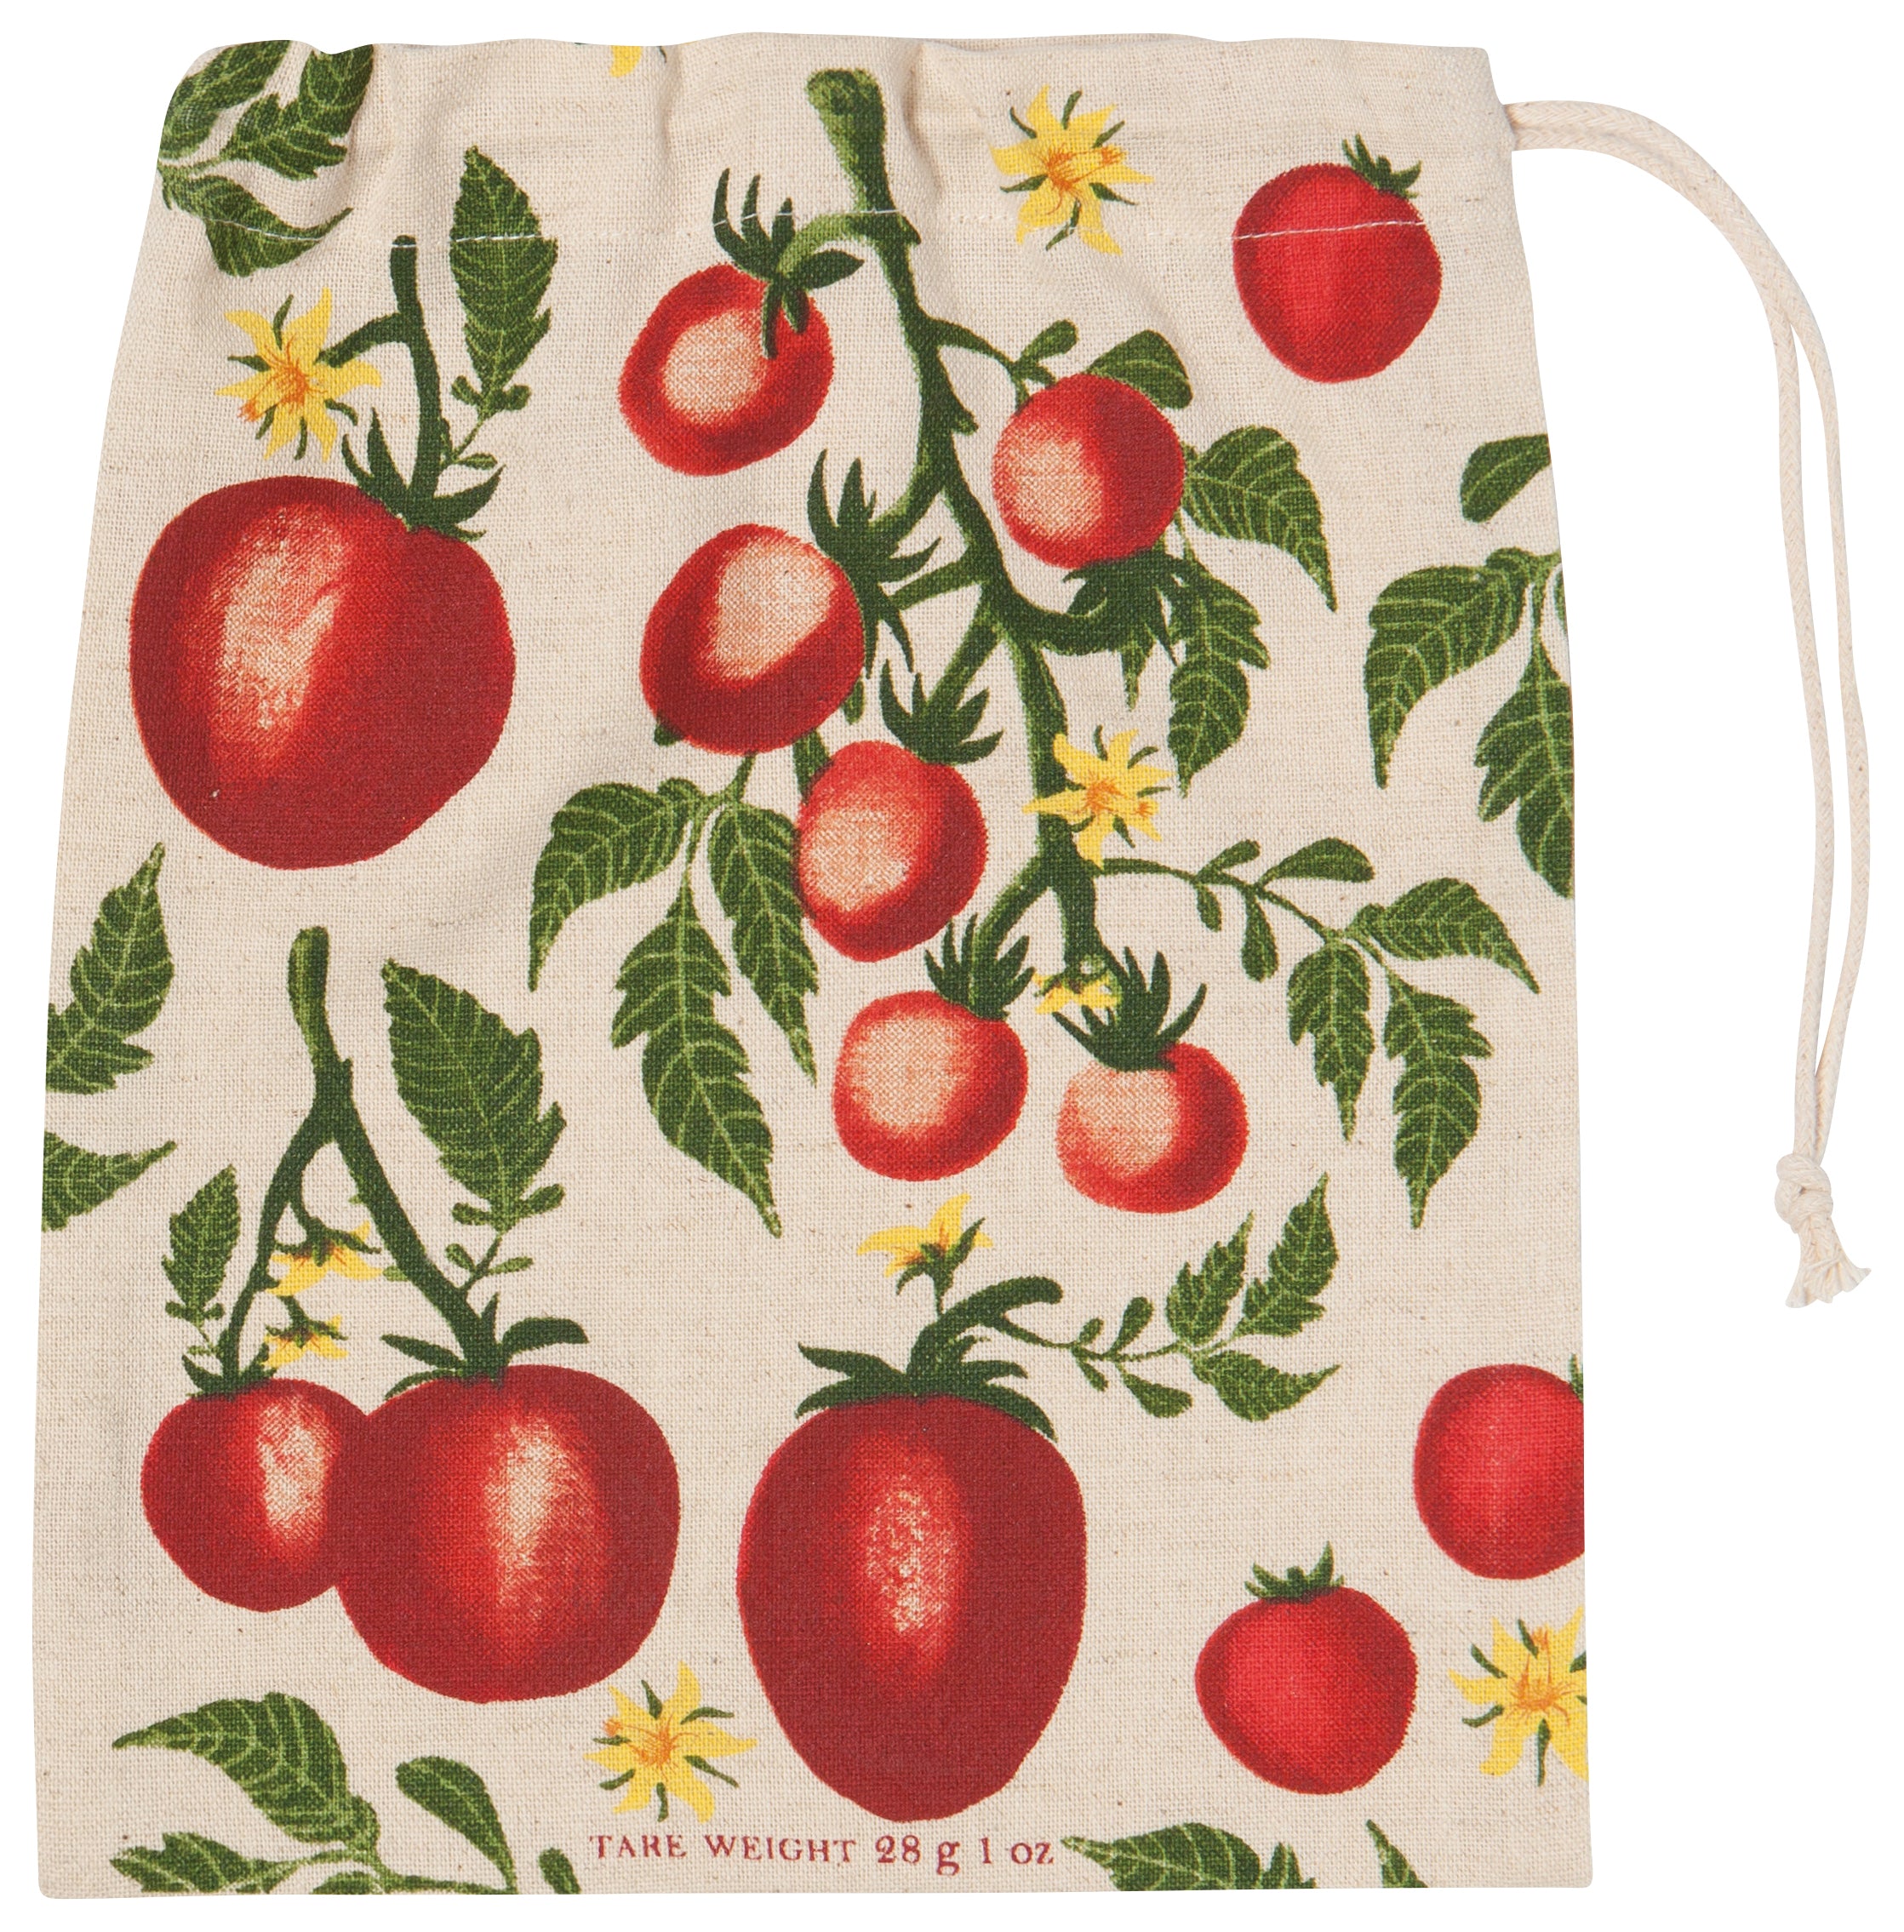 off white pouch with vintage portrayal of tomatoes 